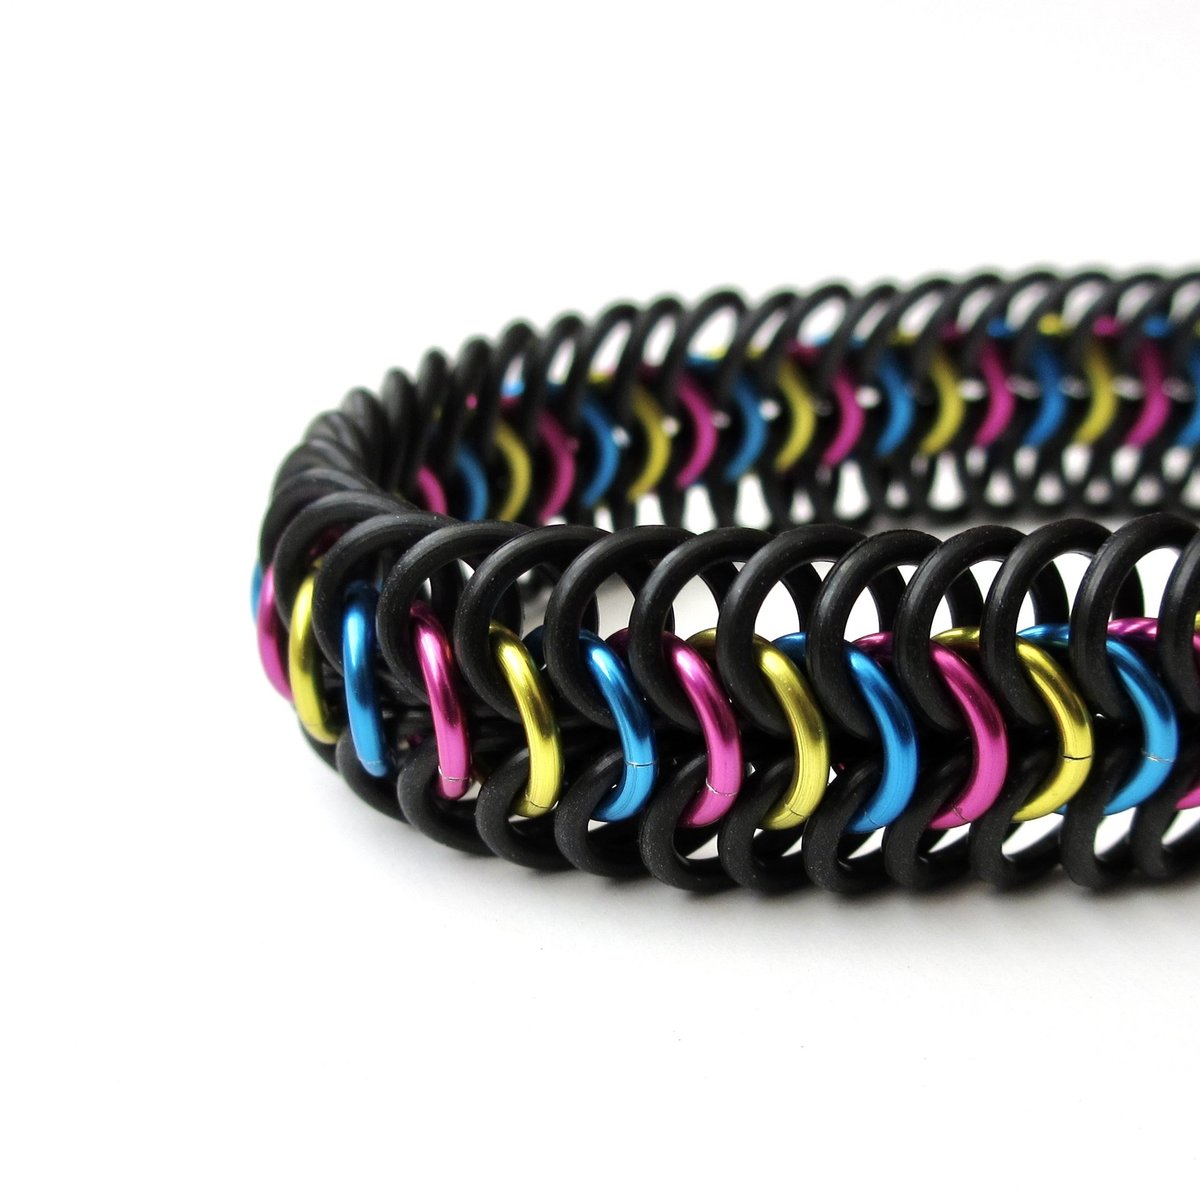 Pansexual pride bracelet, pan pride jewelry, chainmail stretchy bracelet in pink, yellow and blue